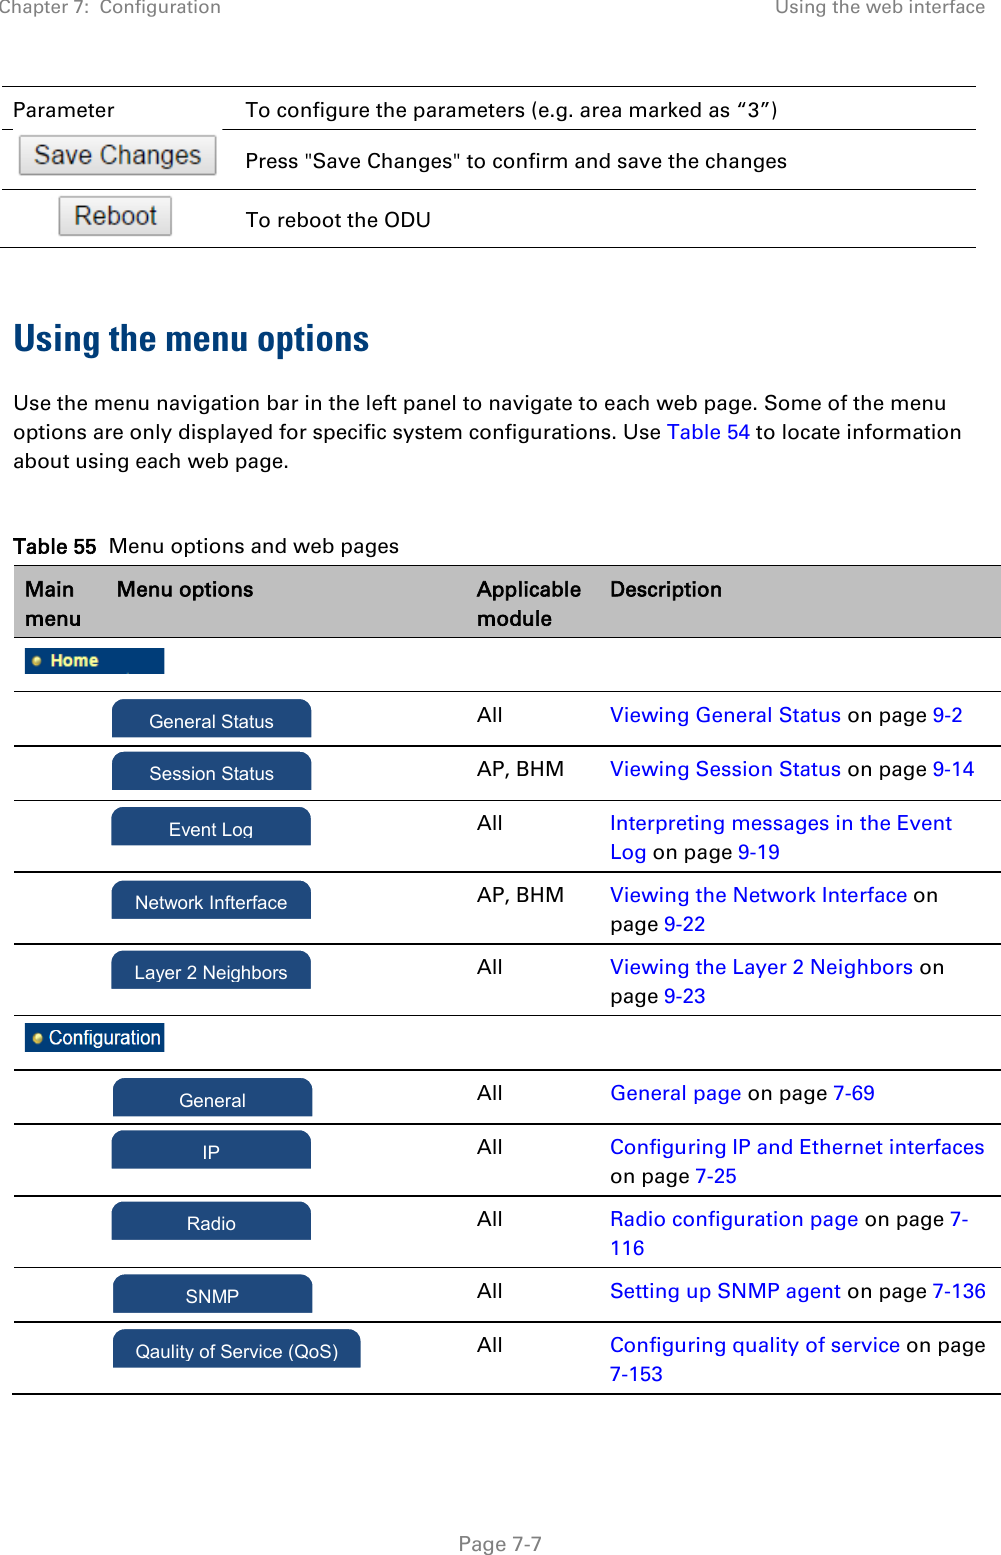 Chapter 7:  Configuration Using the web interface   Page 7-7 Parameter To configure the parameters (e.g. area marked as “3”)  Press &quot;Save Changes&quot; to confirm and save the changes  To reboot the ODU  Using the menu options Use the menu navigation bar in the left panel to navigate to each web page. Some of the menu options are only displayed for specific system configurations. Use Table 54 to locate information about using each web page.  Table 55  Menu options and web pages Main menu Menu options Applicable module Description       All Viewing General Status on page 9-2   AP, BHM Viewing Session Status on page 9-14   All Interpreting messages in the Event Log on page 9-19   AP, BHM Viewing the Network Interface on page 9-22   All Viewing the Layer 2 Neighbors on page 9-23       All General page on page 7-69   All Configuring IP and Ethernet interfaces on page 7-25   All Radio configuration page on page 7-116   All Setting up SNMP agent on page 7-136   All Configuring quality of service on page 7-153 Event Log Network Infterface General IP Radio SNMP Qaulity of Service (QoS) Layer 2 Neighbors Session Status General Status 